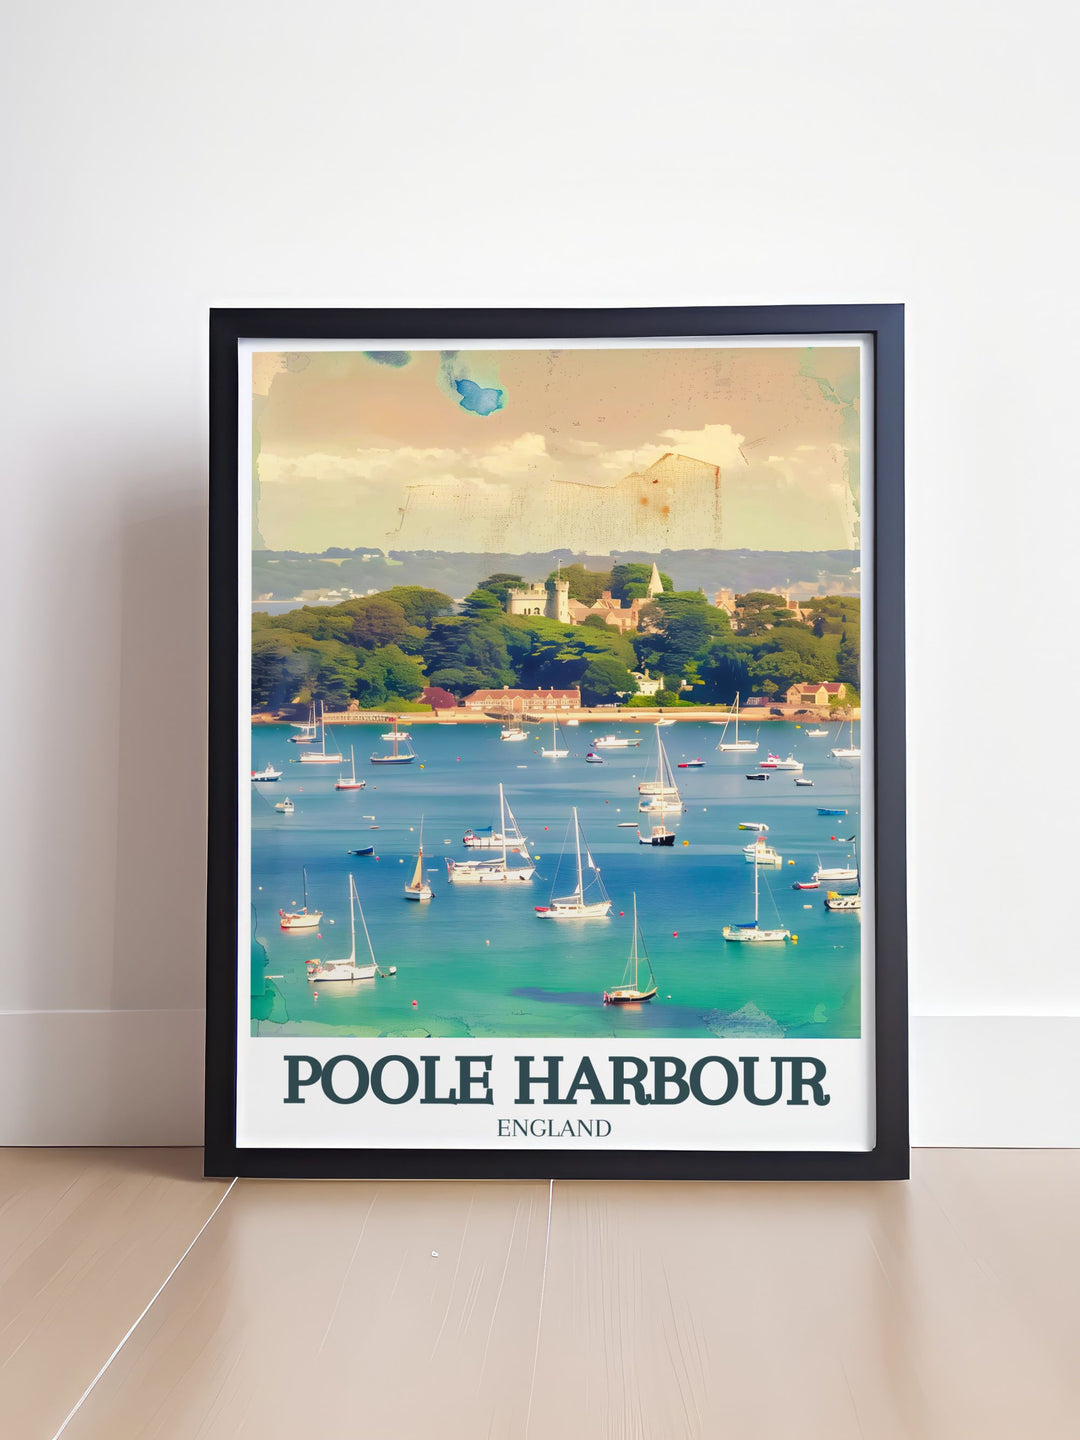 Elegant England wall art print depicting Poole Harbour and Brownsea Island and Sandbanks Beach a perfect blend of modern design and natural beauty making it an ideal gift for boyfriends dads girlfriends and more